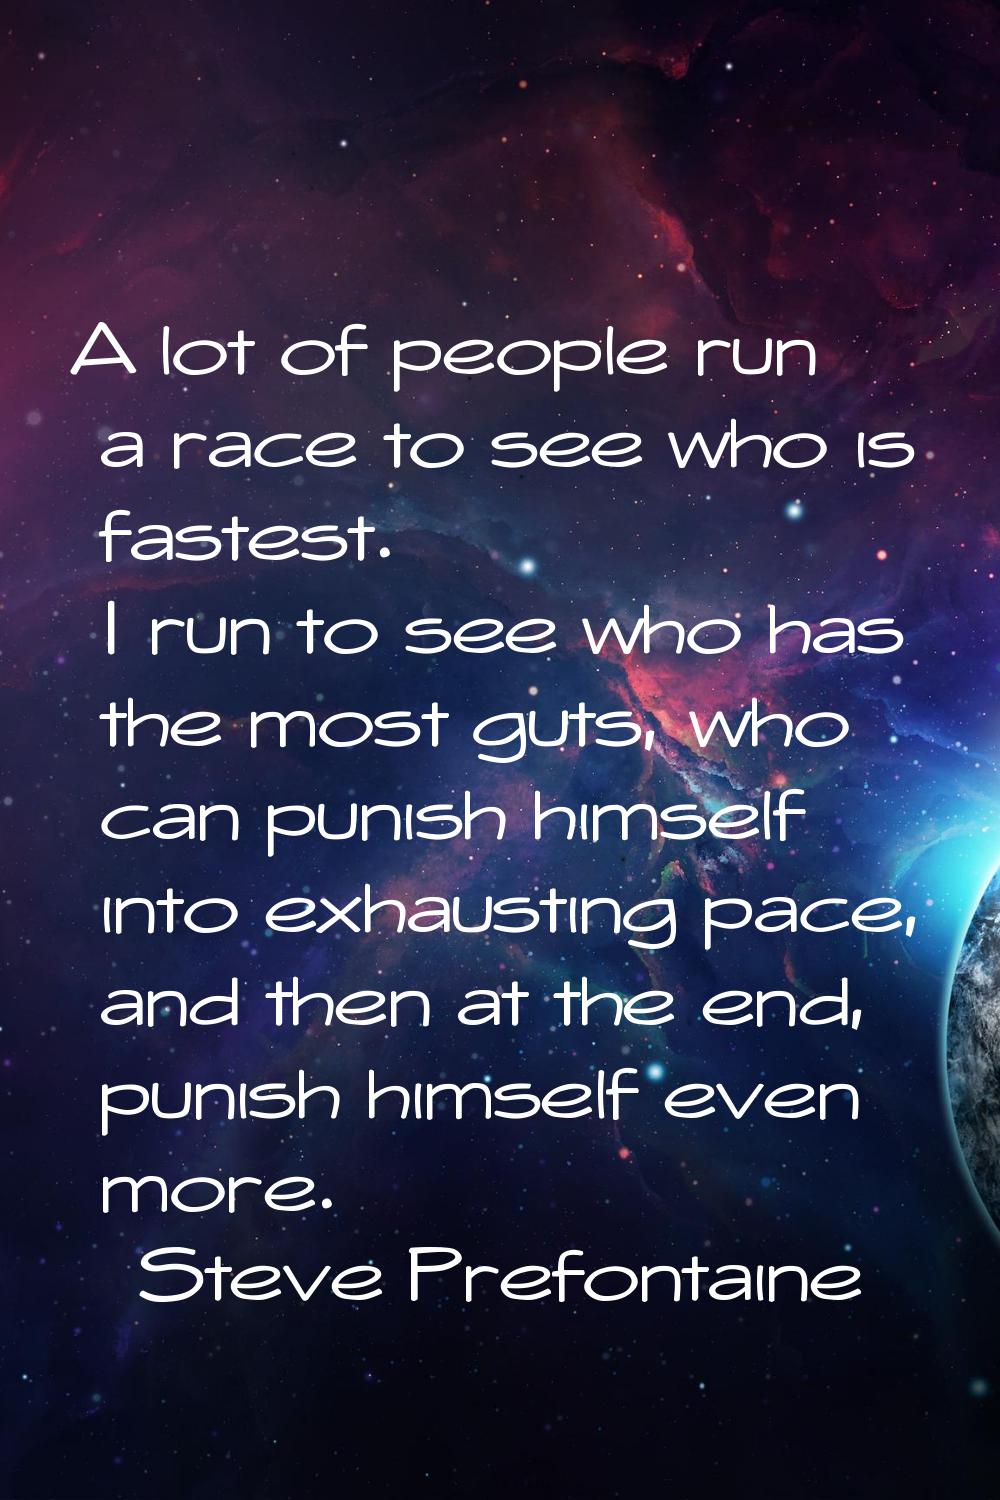 A lot of people run a race to see who is fastest. I run to see who has the most guts, who can punis